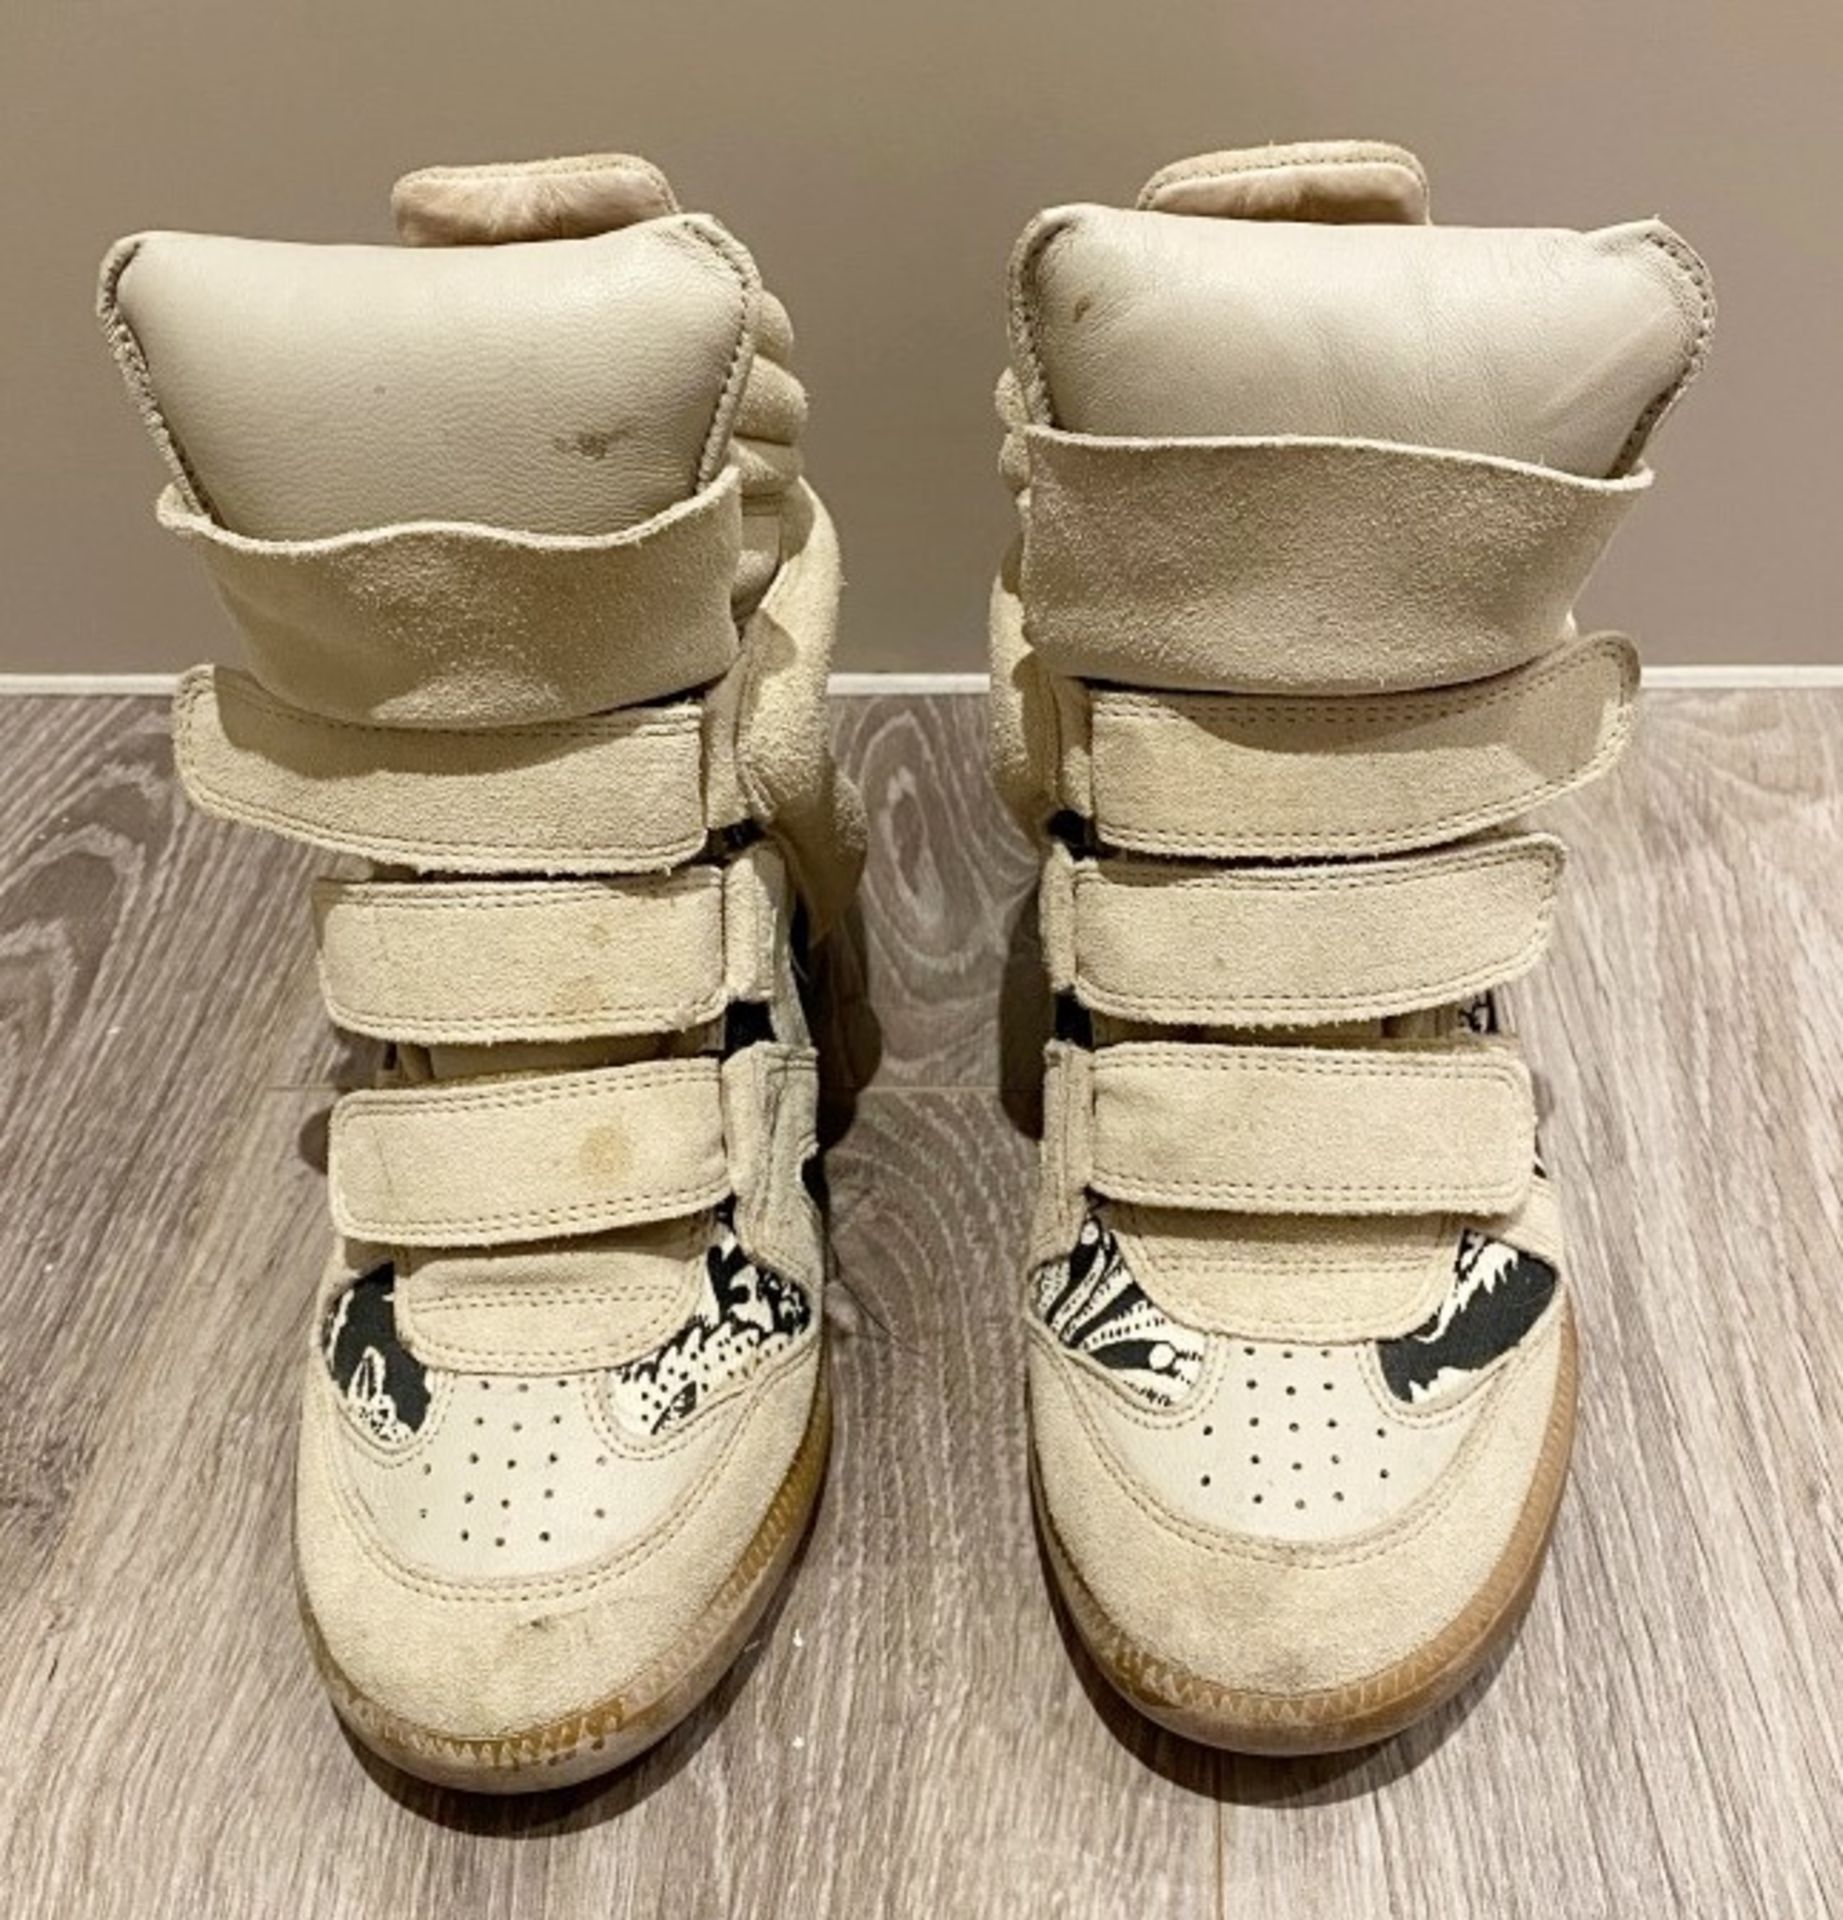 1 x Pair Of Genuine Isabel Marant Boots In Crème And Black - Size: 36 - Preowned in Very Good Condit - Image 4 of 4